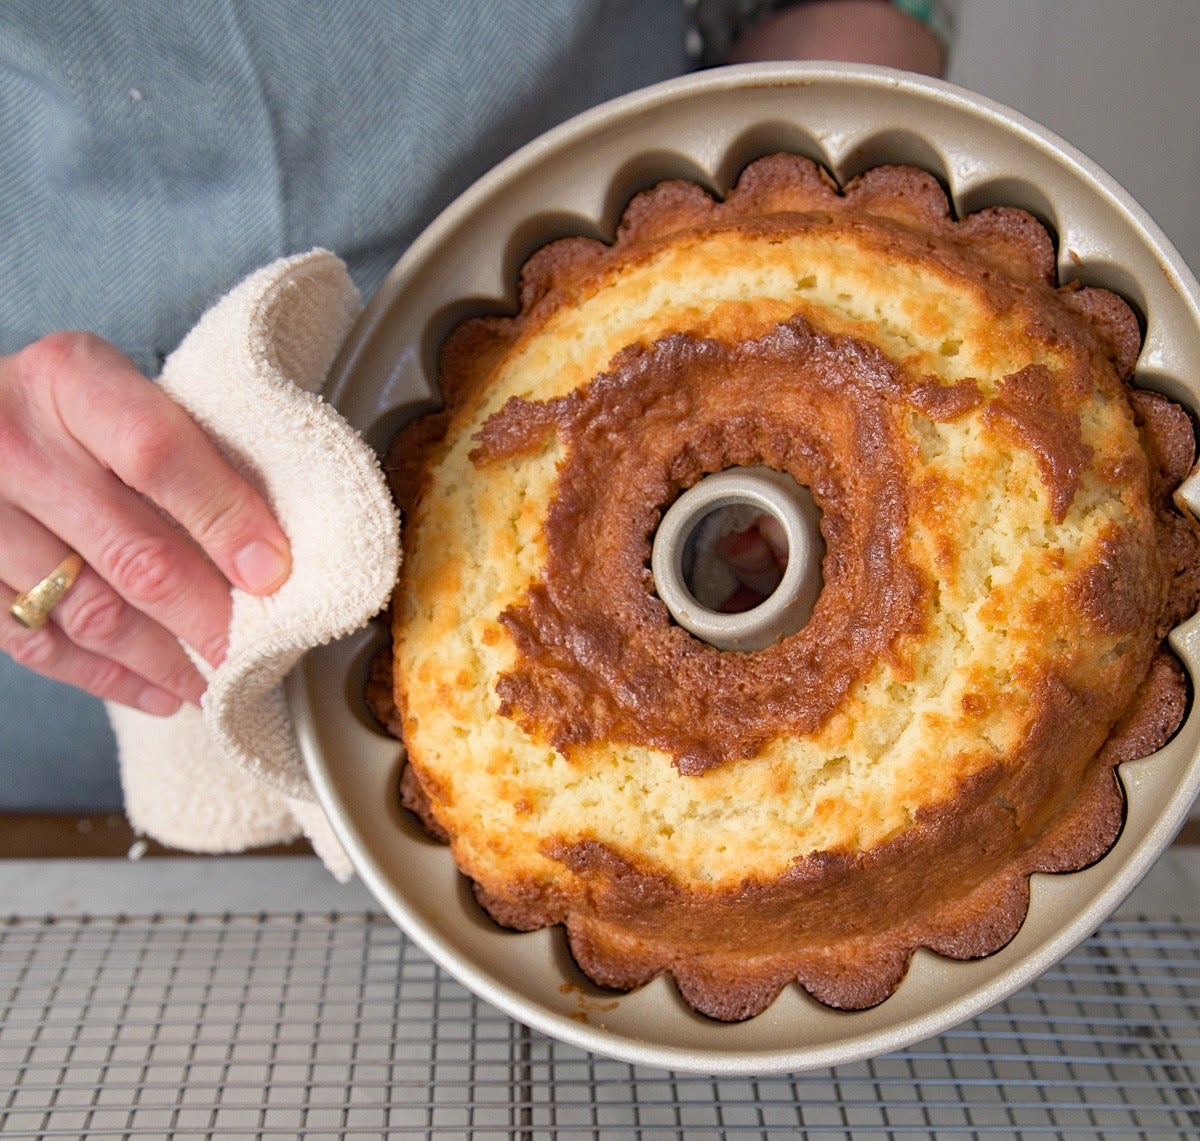 How to Keep a Bundt Cake From Sticking to the Pan